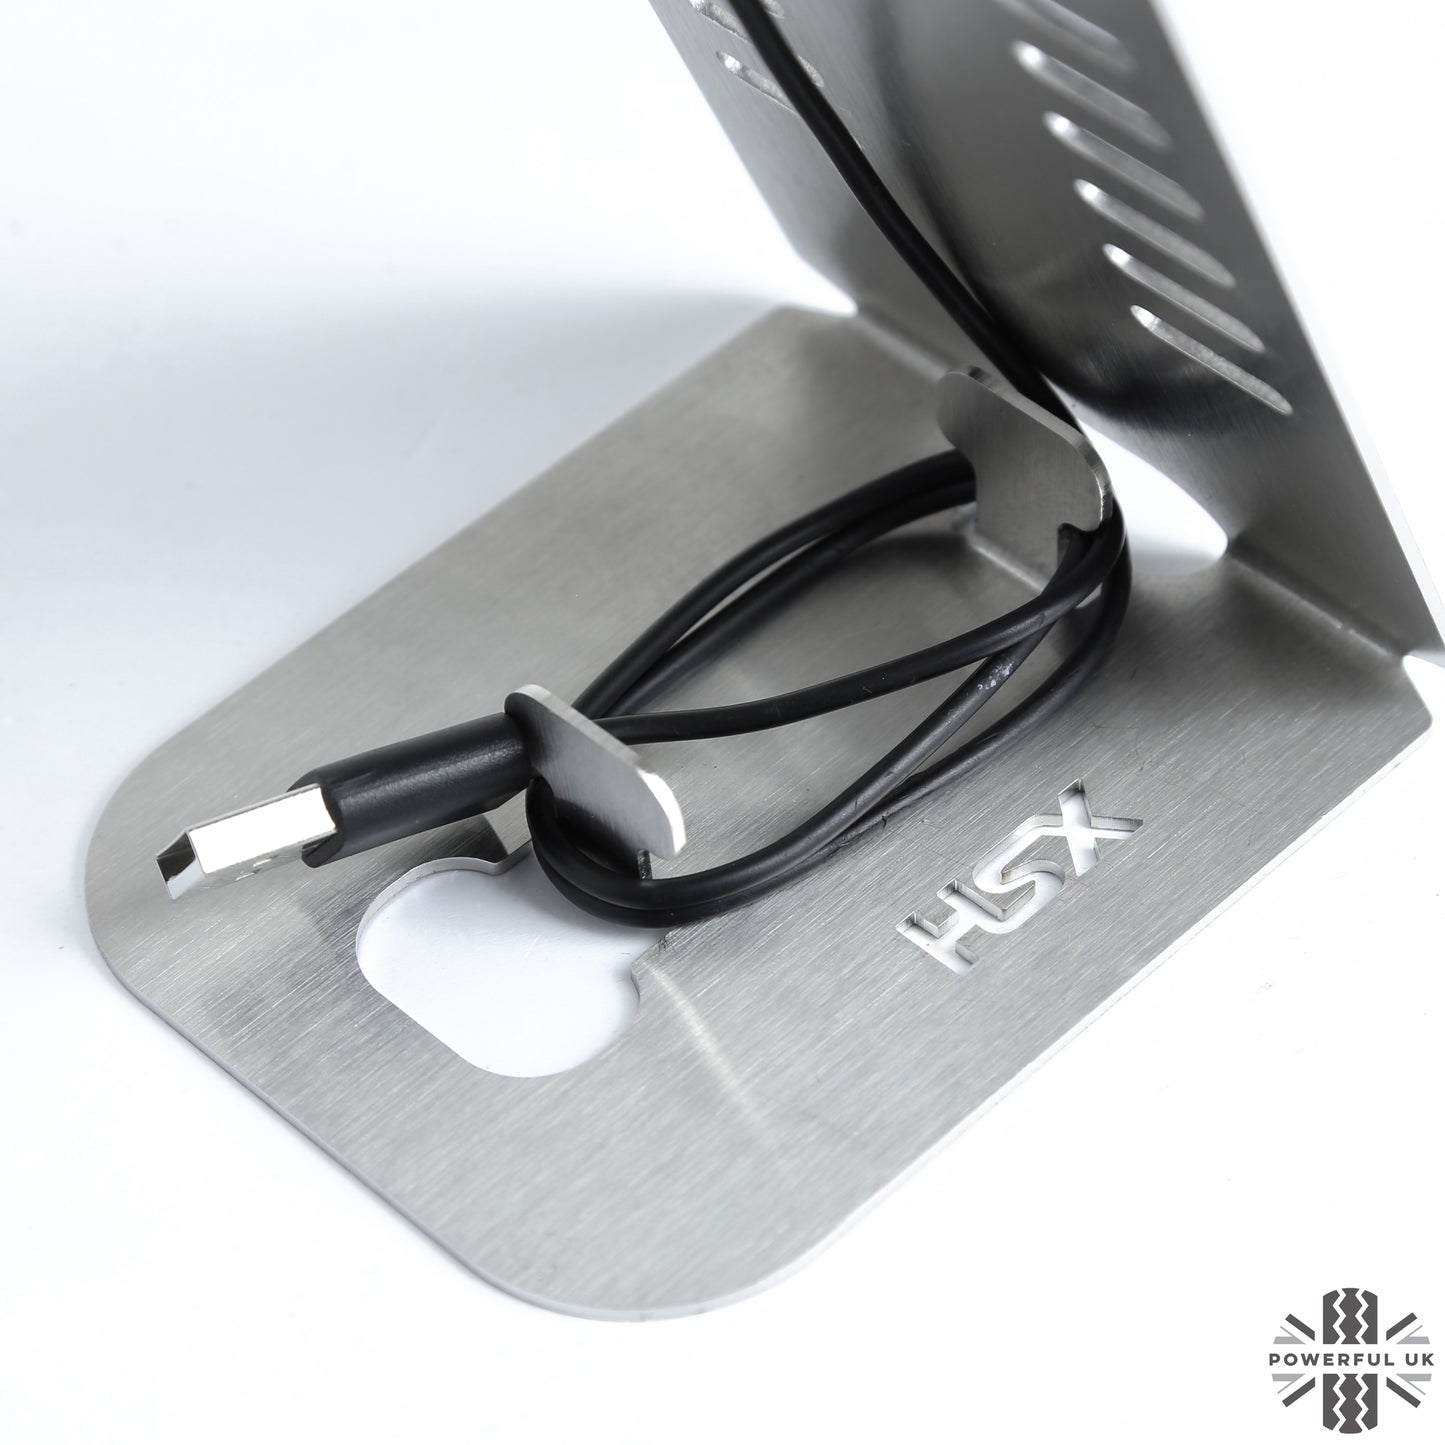 Brushed StainlessSteel - Activity Key Watch Holder/ Charging Stand